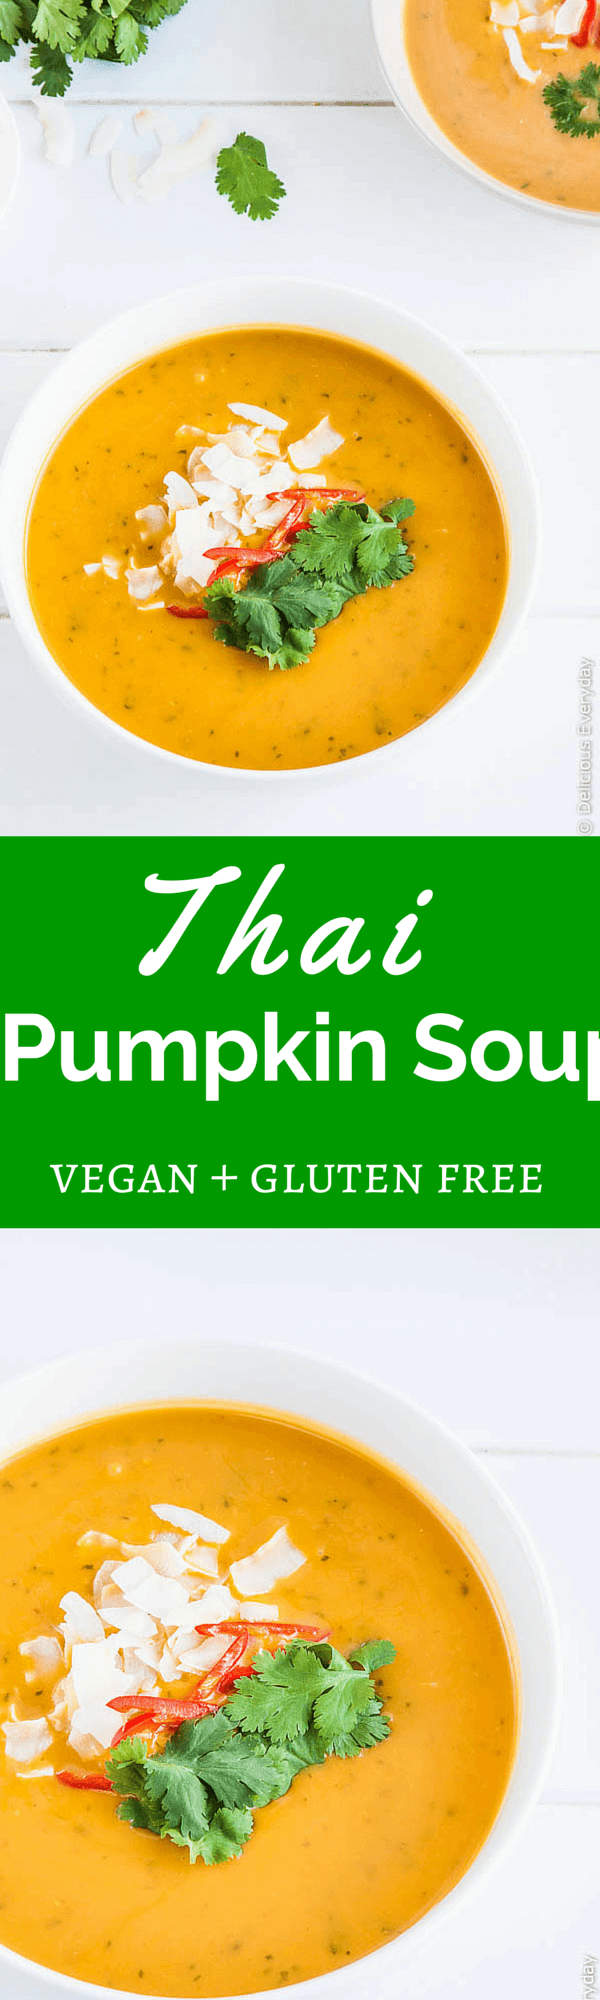 Thai-Style Pumpkin Soup with Coconut Milk - This easy vegan homemade soup is on the table in under 30 minutes. | Get the recipe at deliciouseveryday.com